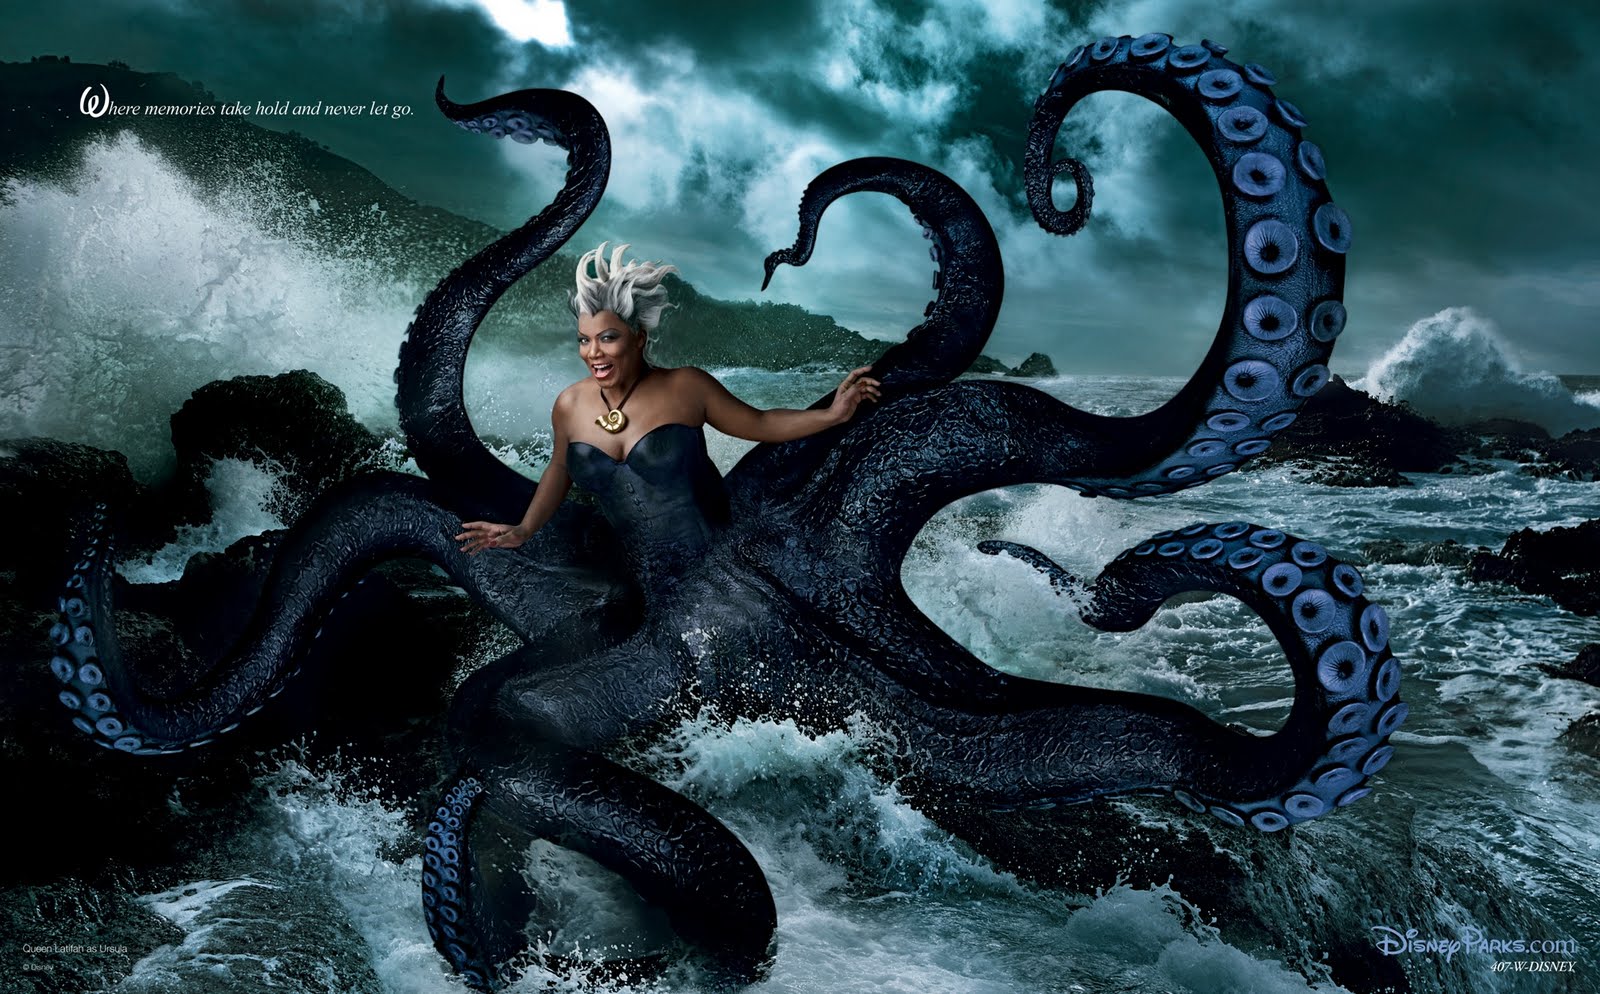 Queen Latifah is Ursula from the Little Mermaid